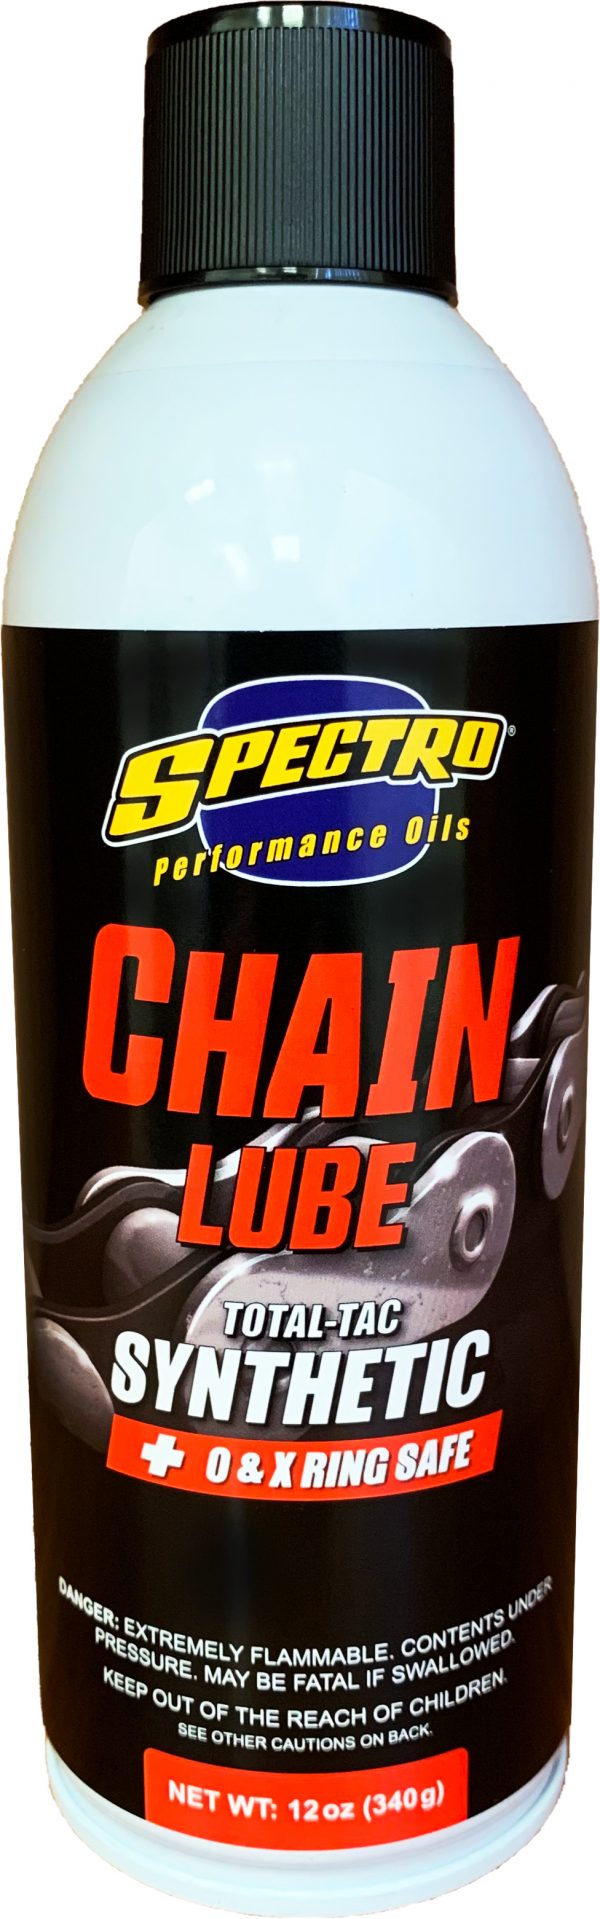 Synthetic Chain Lube Image